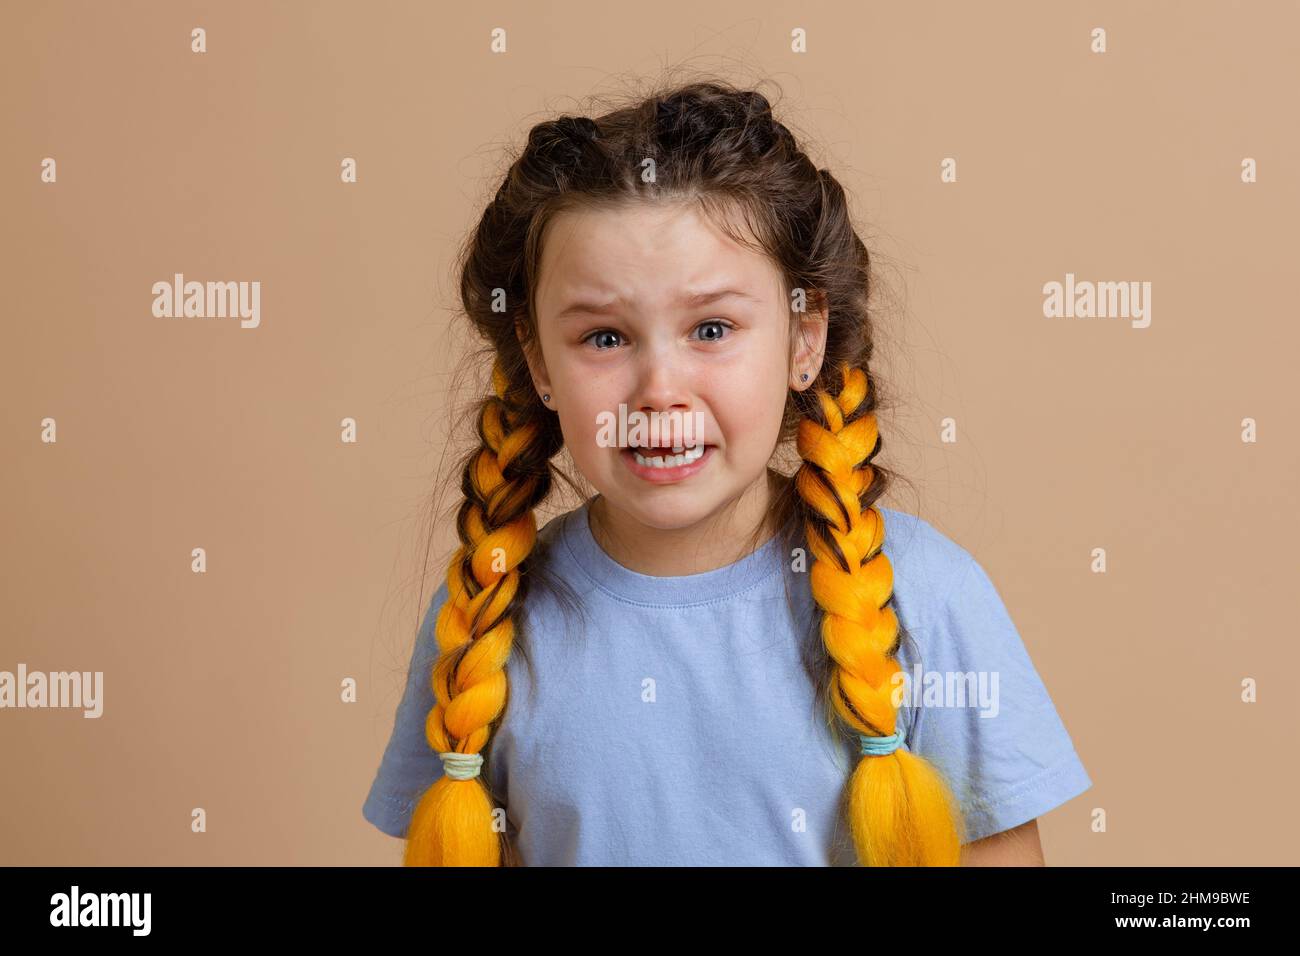 Sad Caucasian young girl crying with open mouth and wet eyes with kanekalon braids of yellow color on head wearing light blue t-shirt on beige Stock Photo